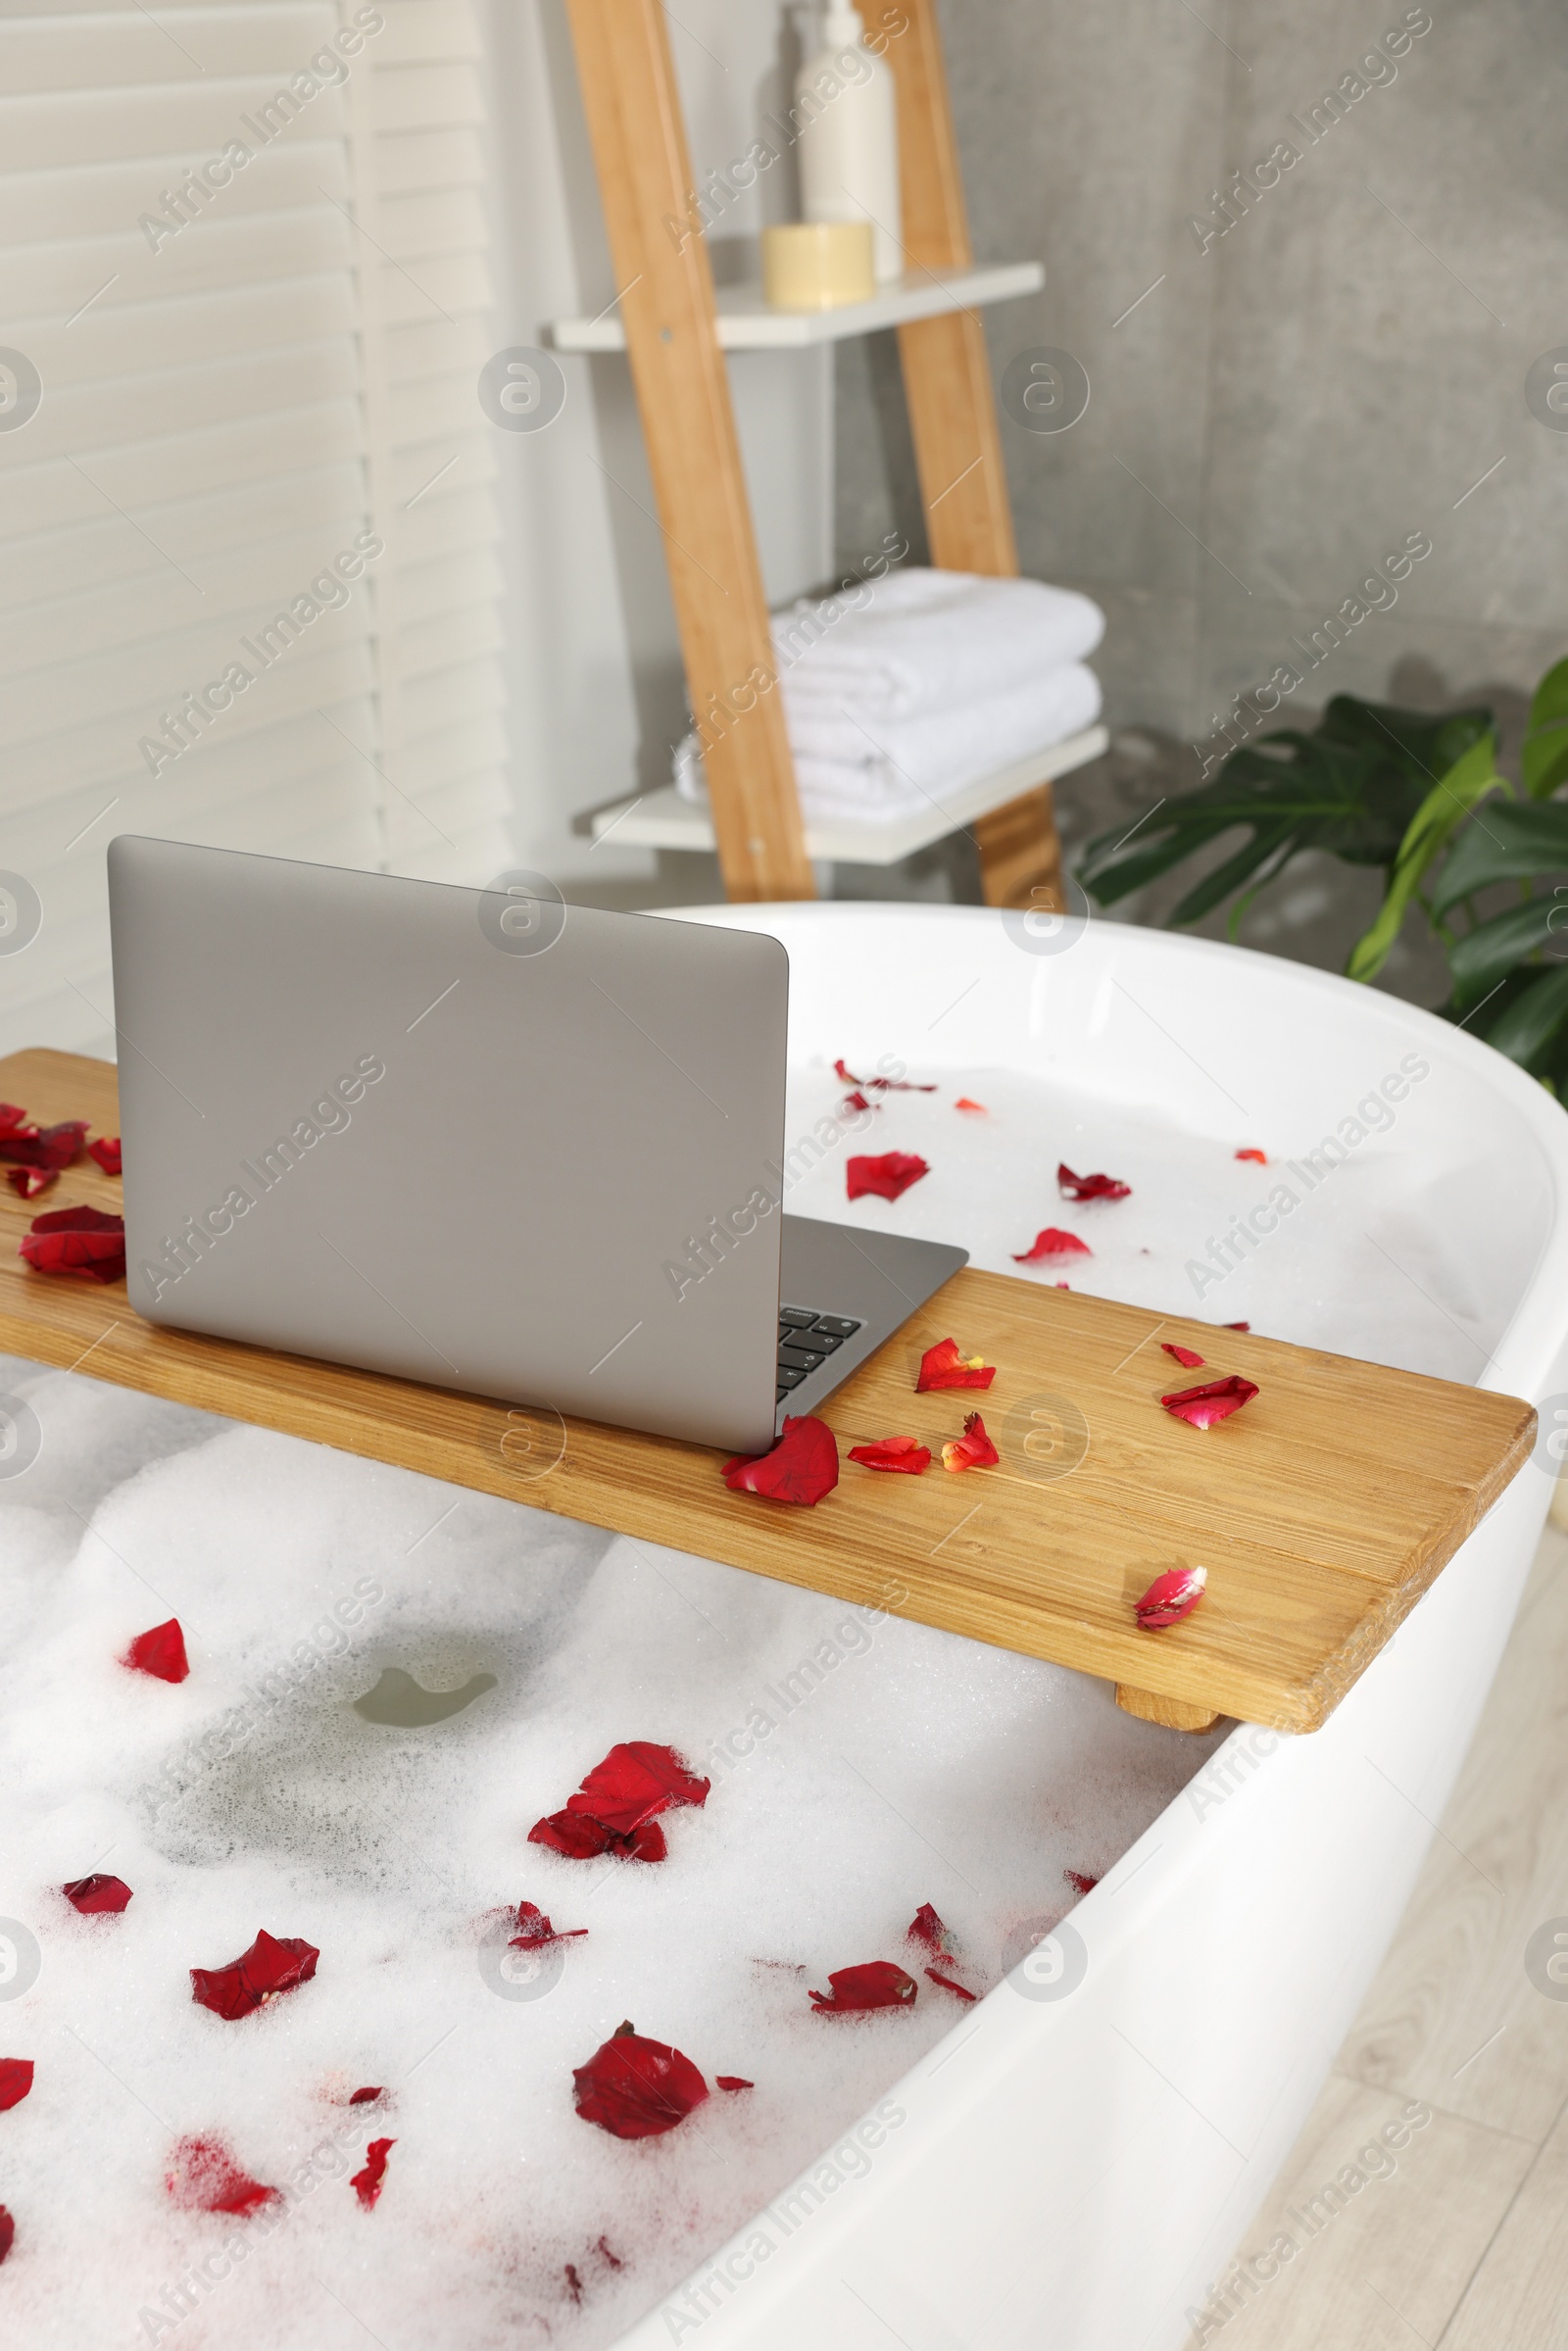 Photo of Wooden board with laptop and rose petals on bath tub in bathroom